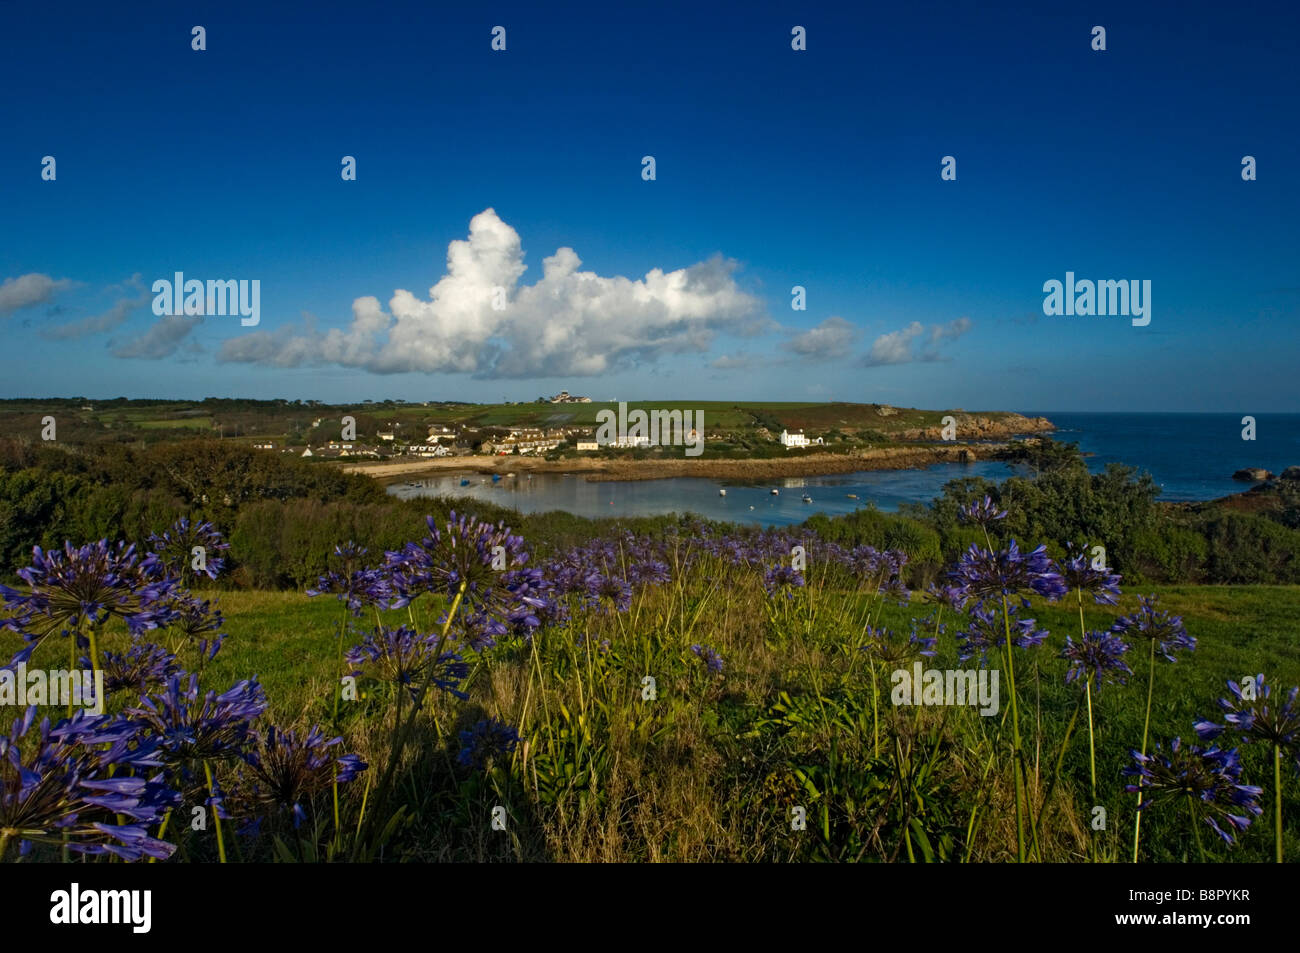 Agapanthus or Lily of the Nile flowers growing on the hillside by Old Town Bay. St Mary's. Isles of Scilly. Cornwall. England UK Stock Photo